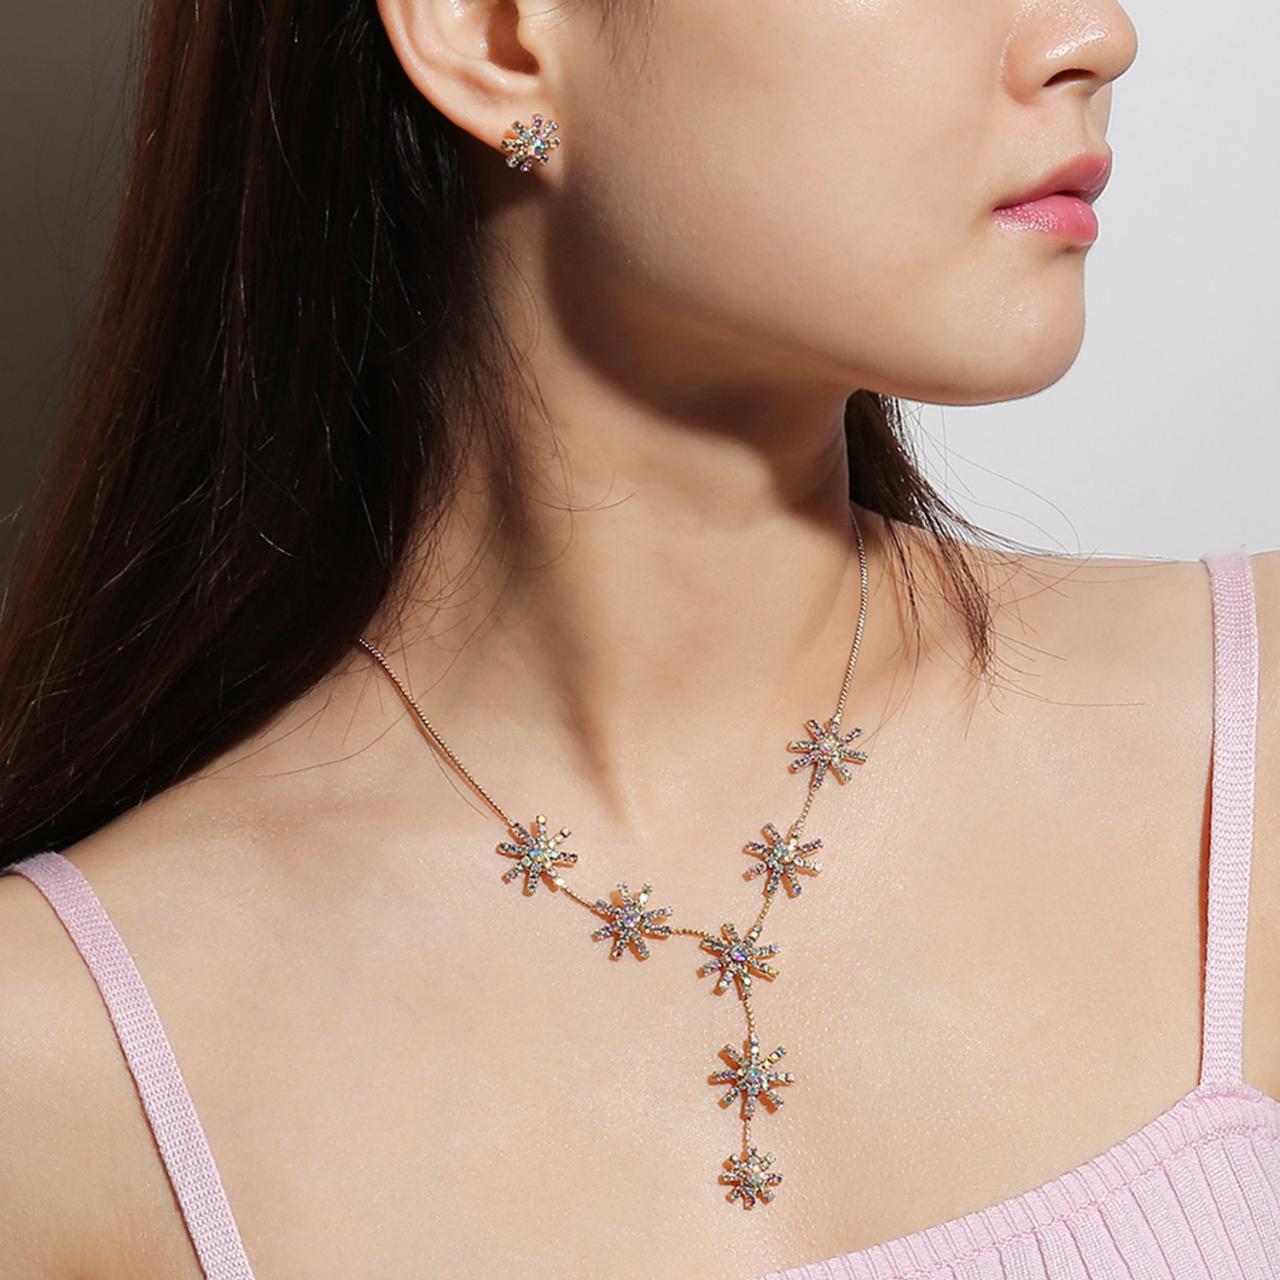 Alloy Studded Helix Clavicular Necklace And Earrings Set